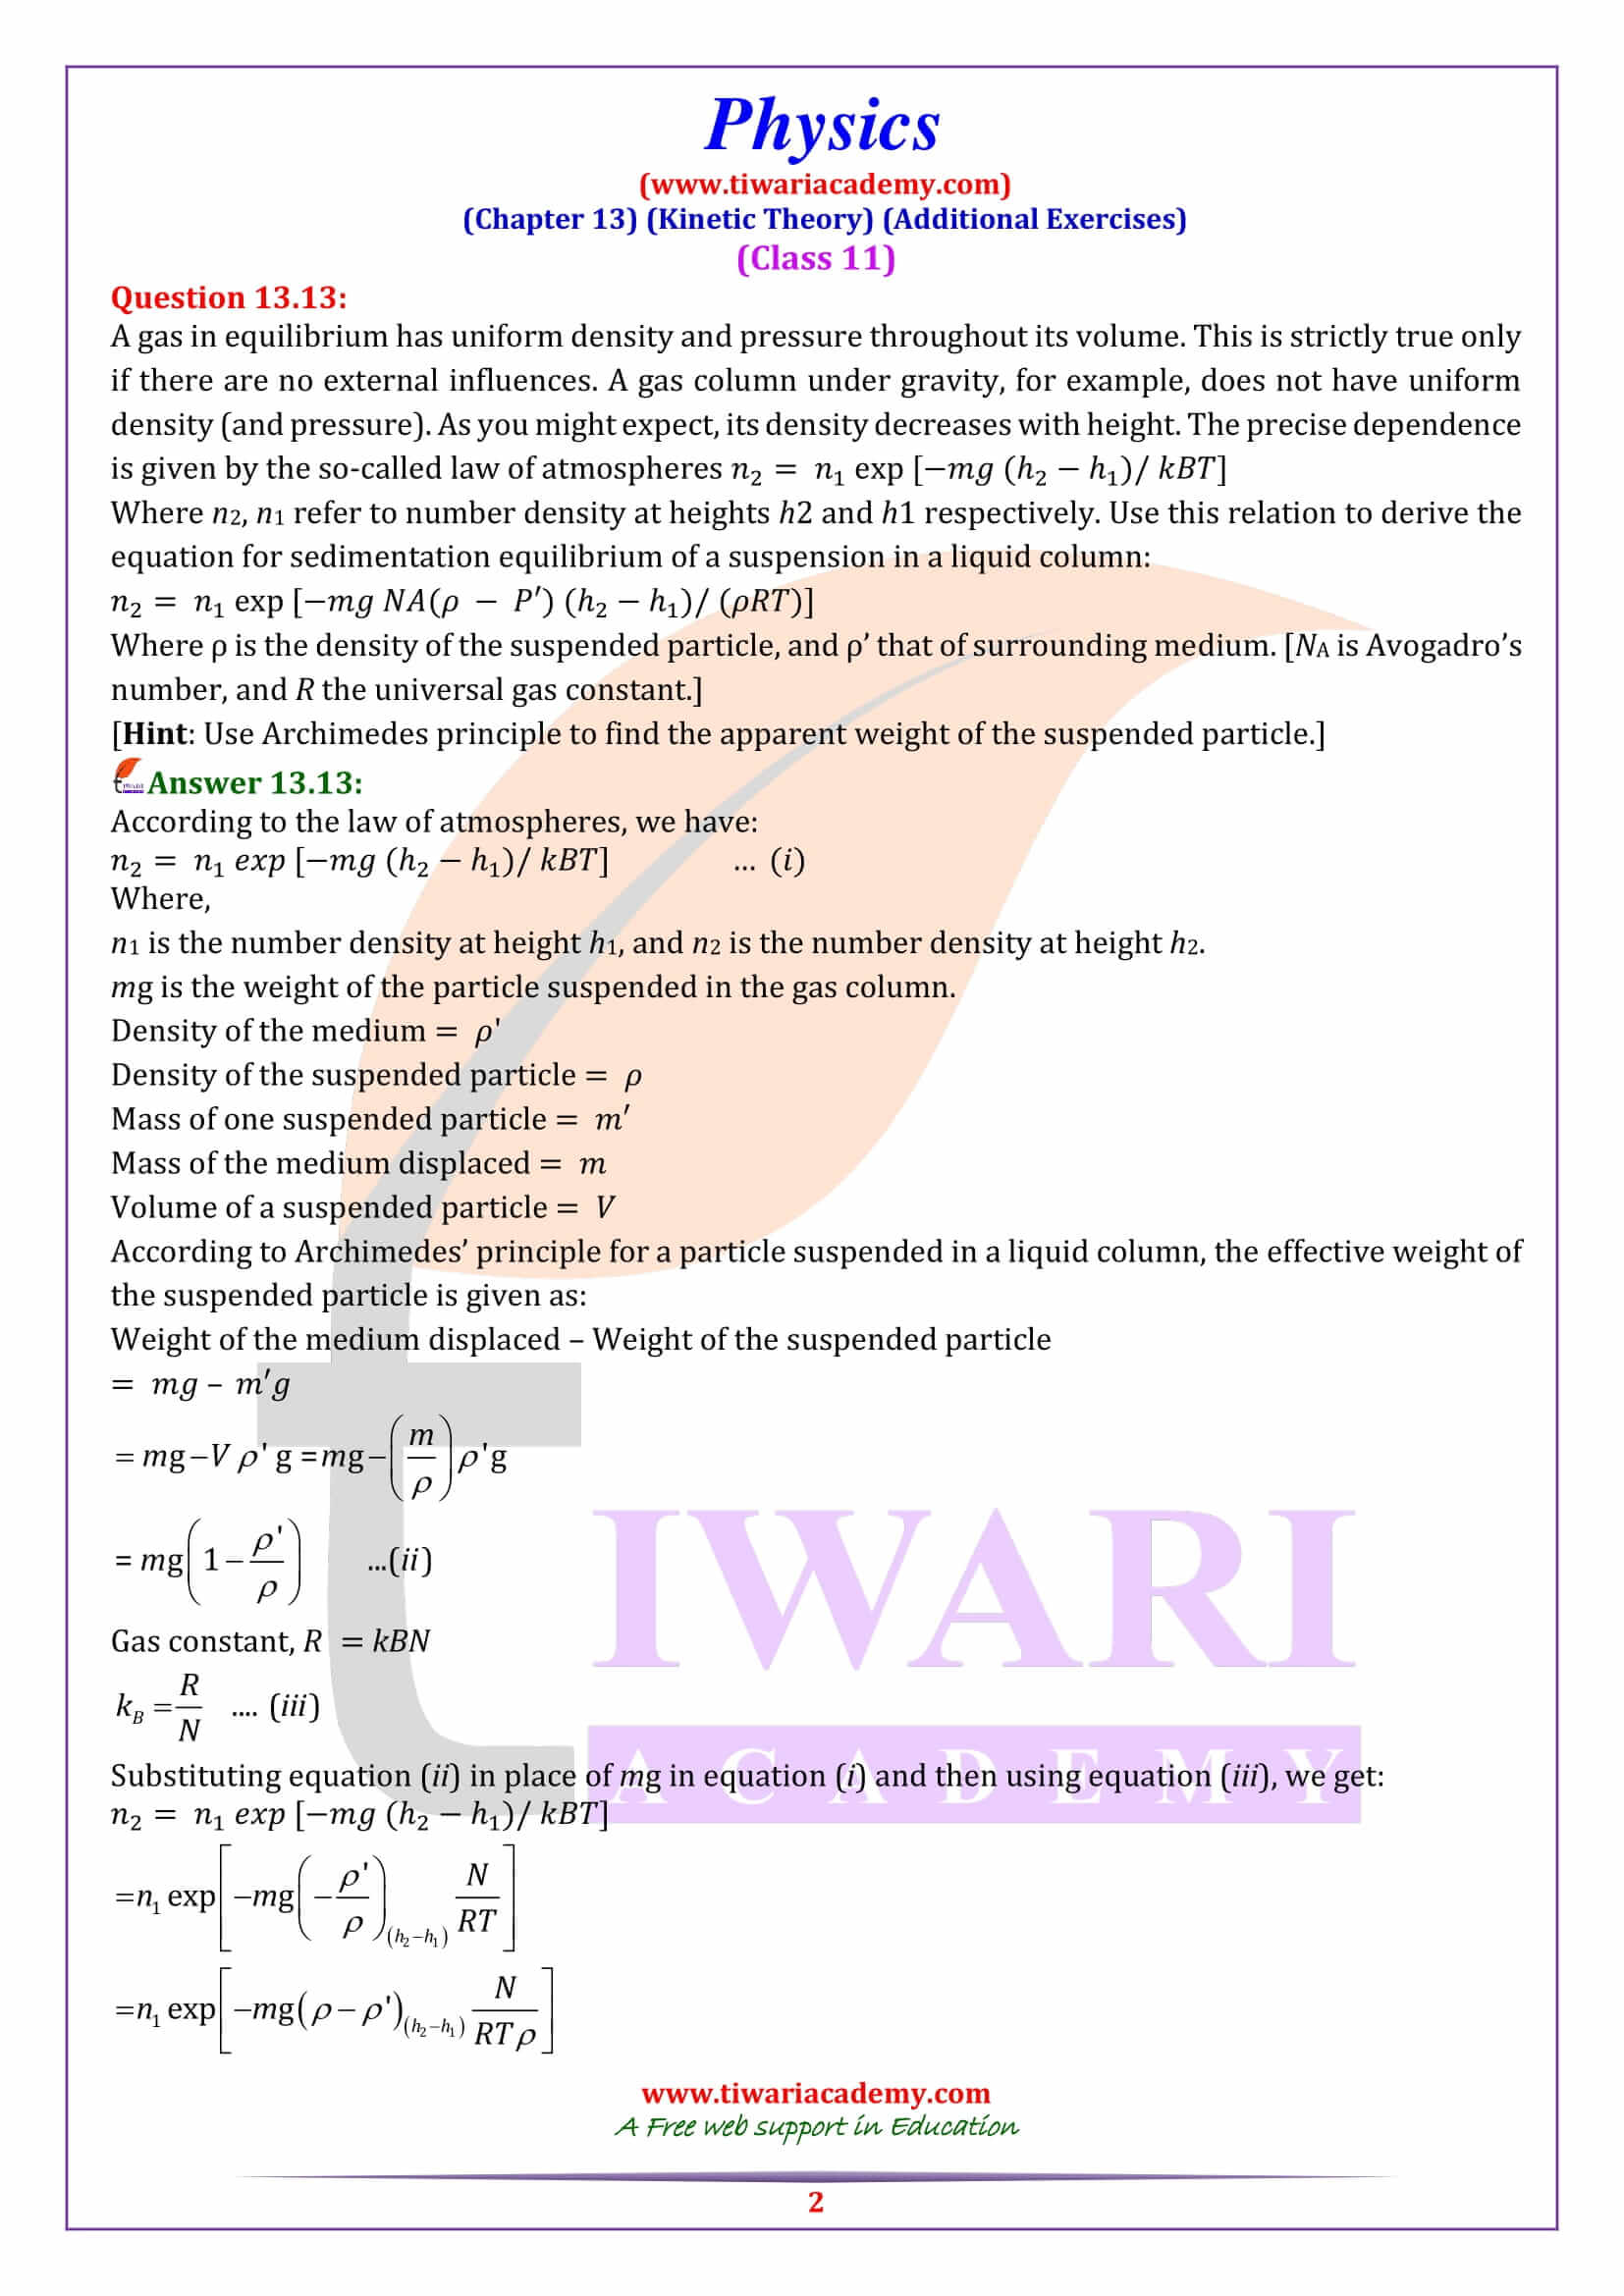 NCERT Solutions for Class 11 Physics Chapter 13